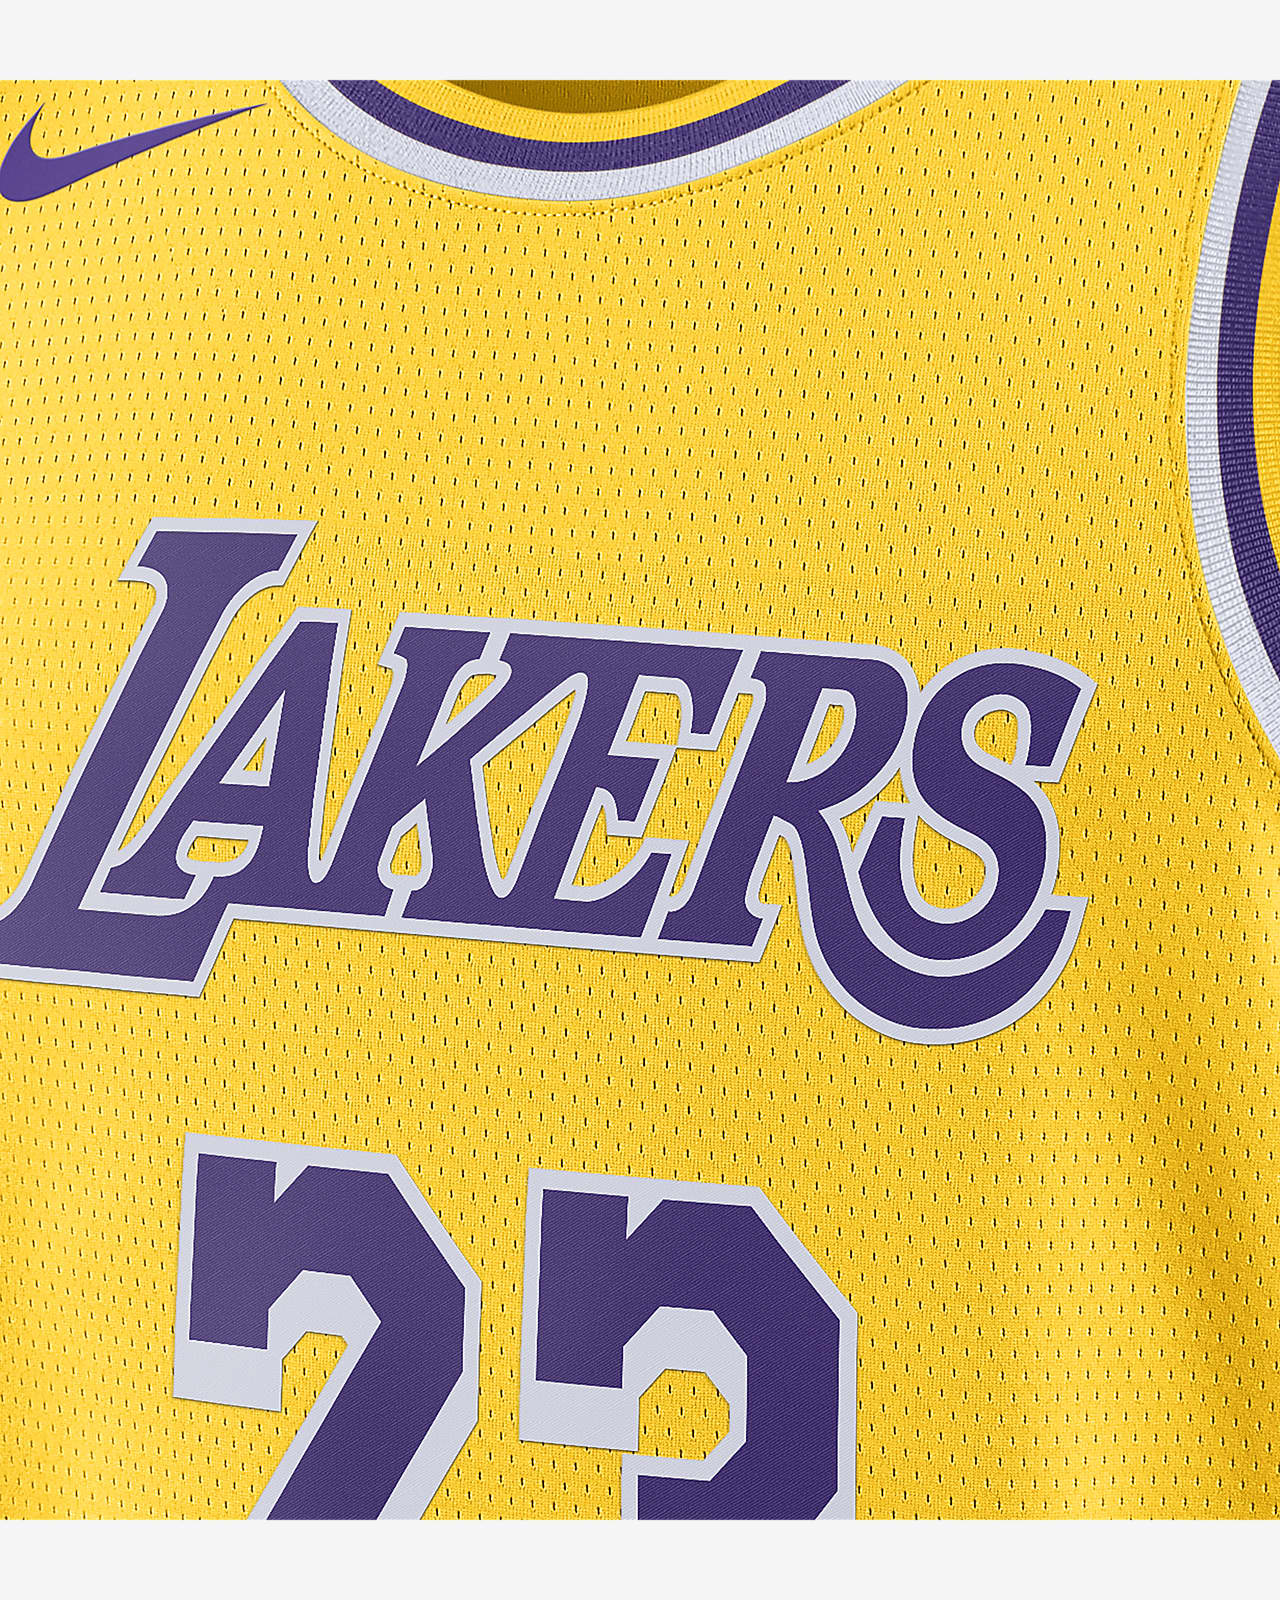 lakers jersey short 2022